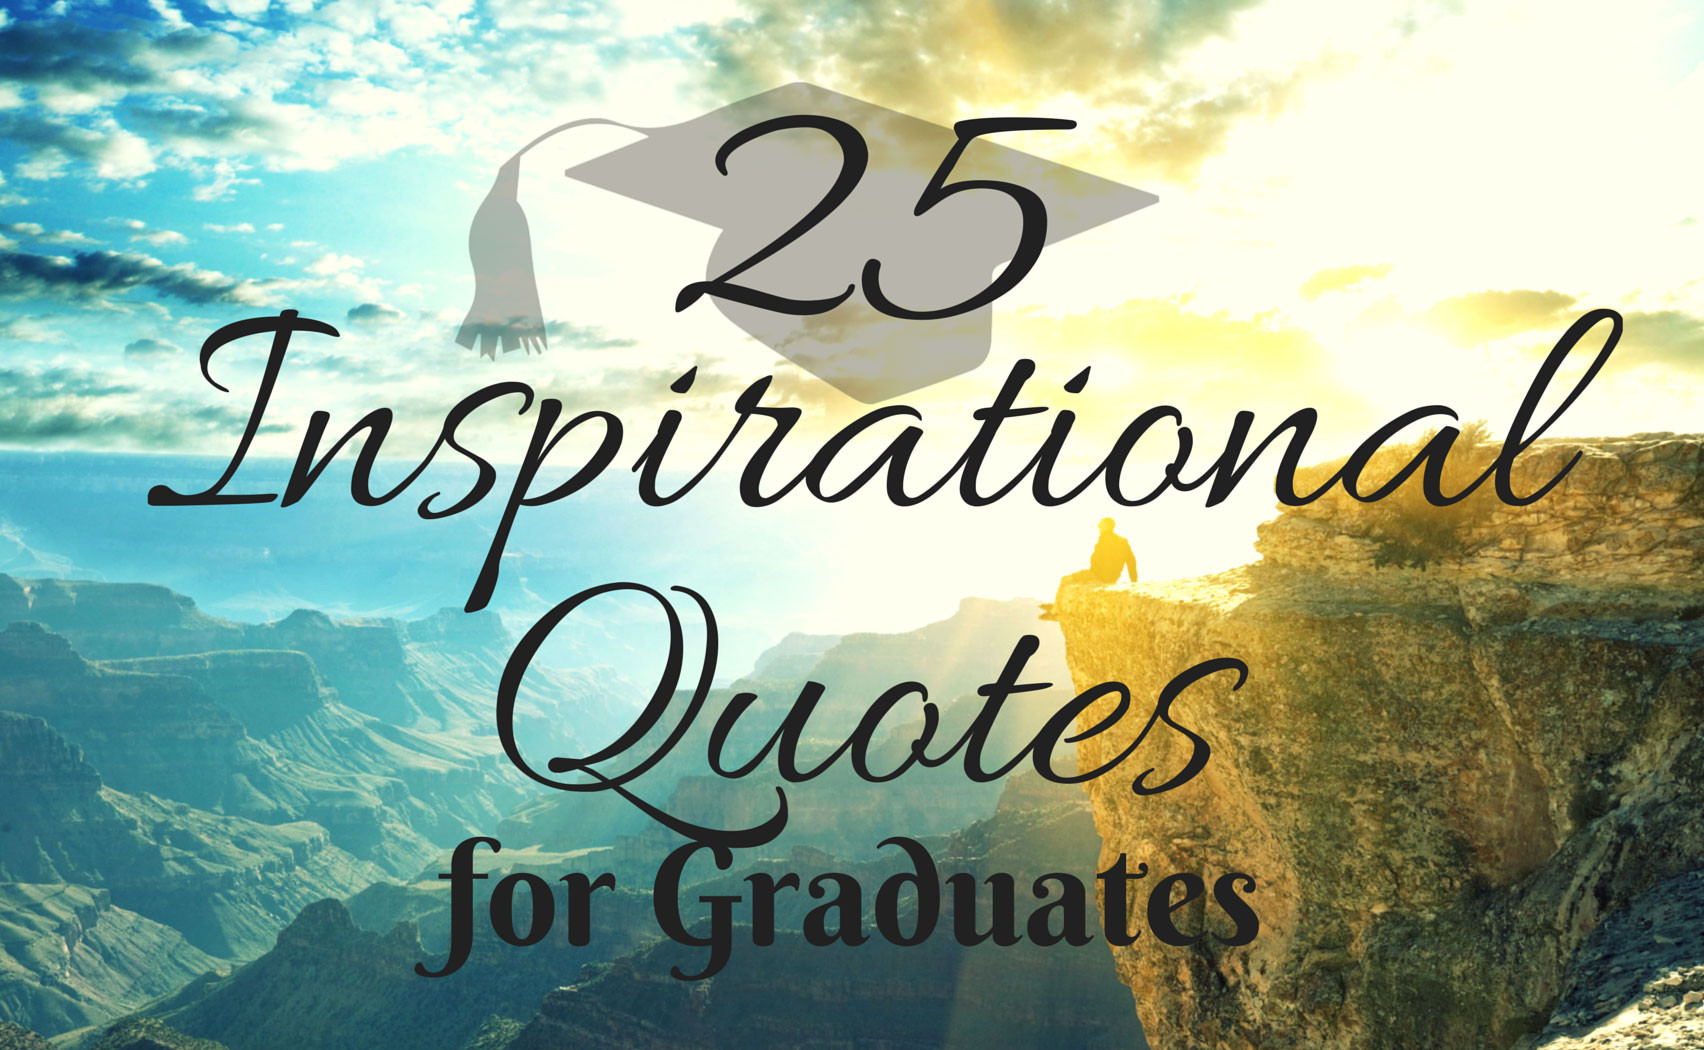 Inspirational Quotes For College Graduates
 Graduation Quotes For Elementary Students QuotesGram